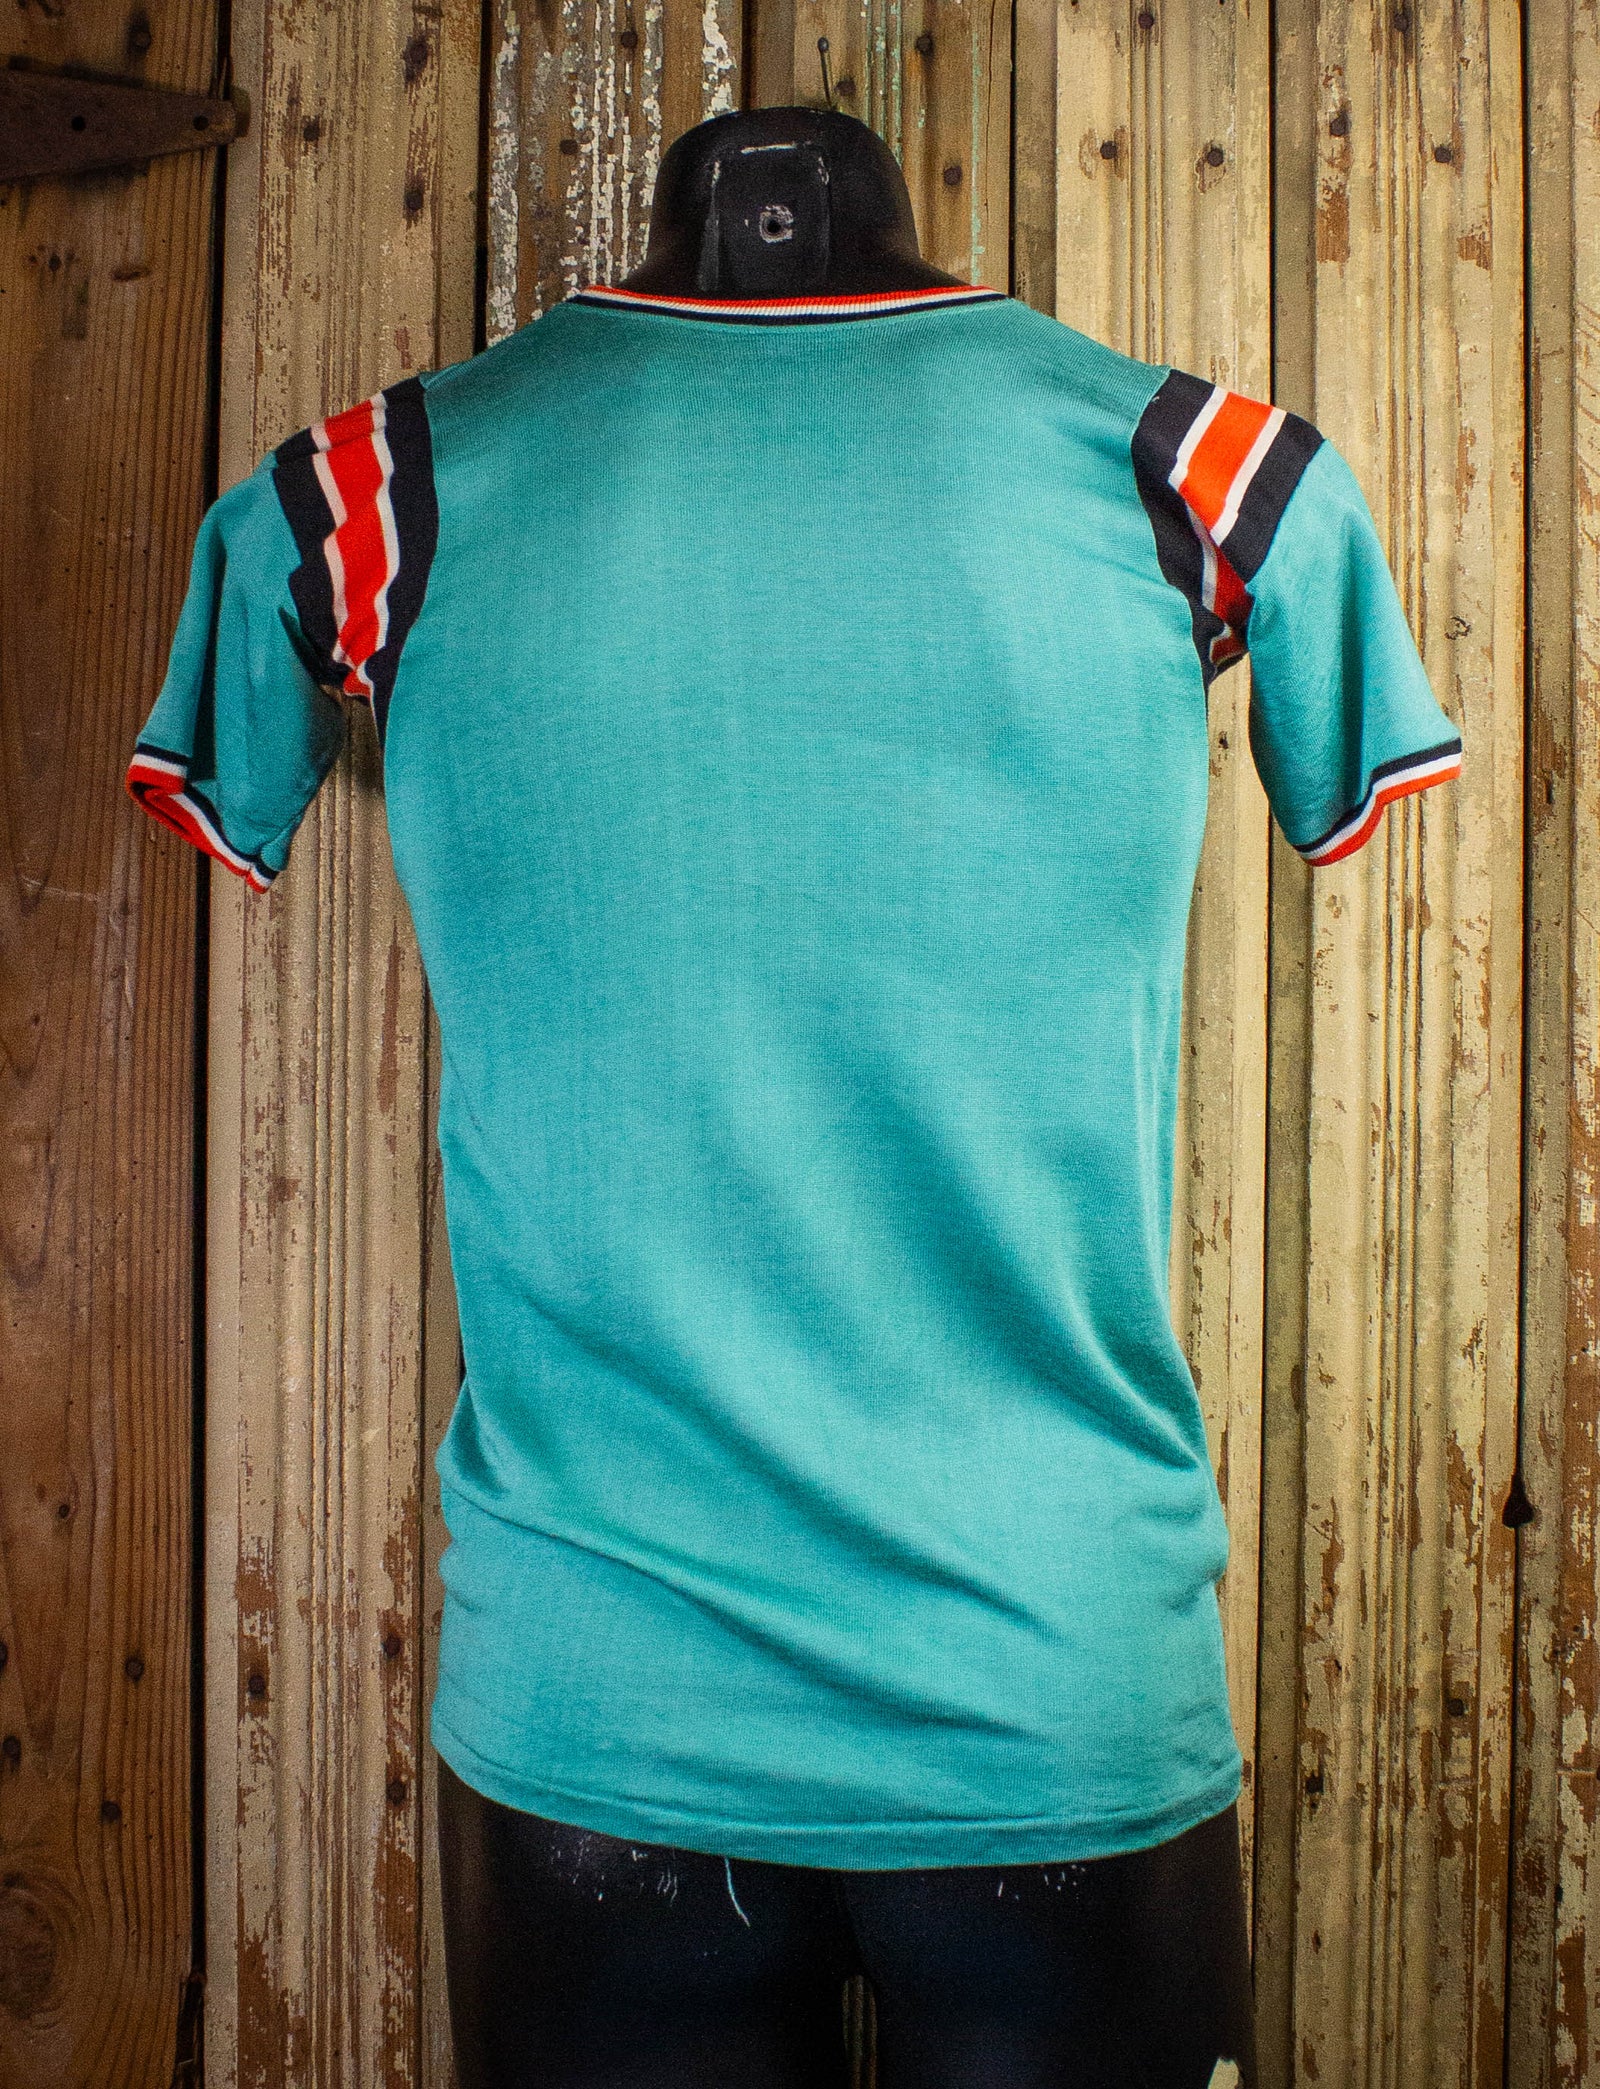 Vintage Ducks Deluxe Jersey T Shirt 60s Teal and Orange Small